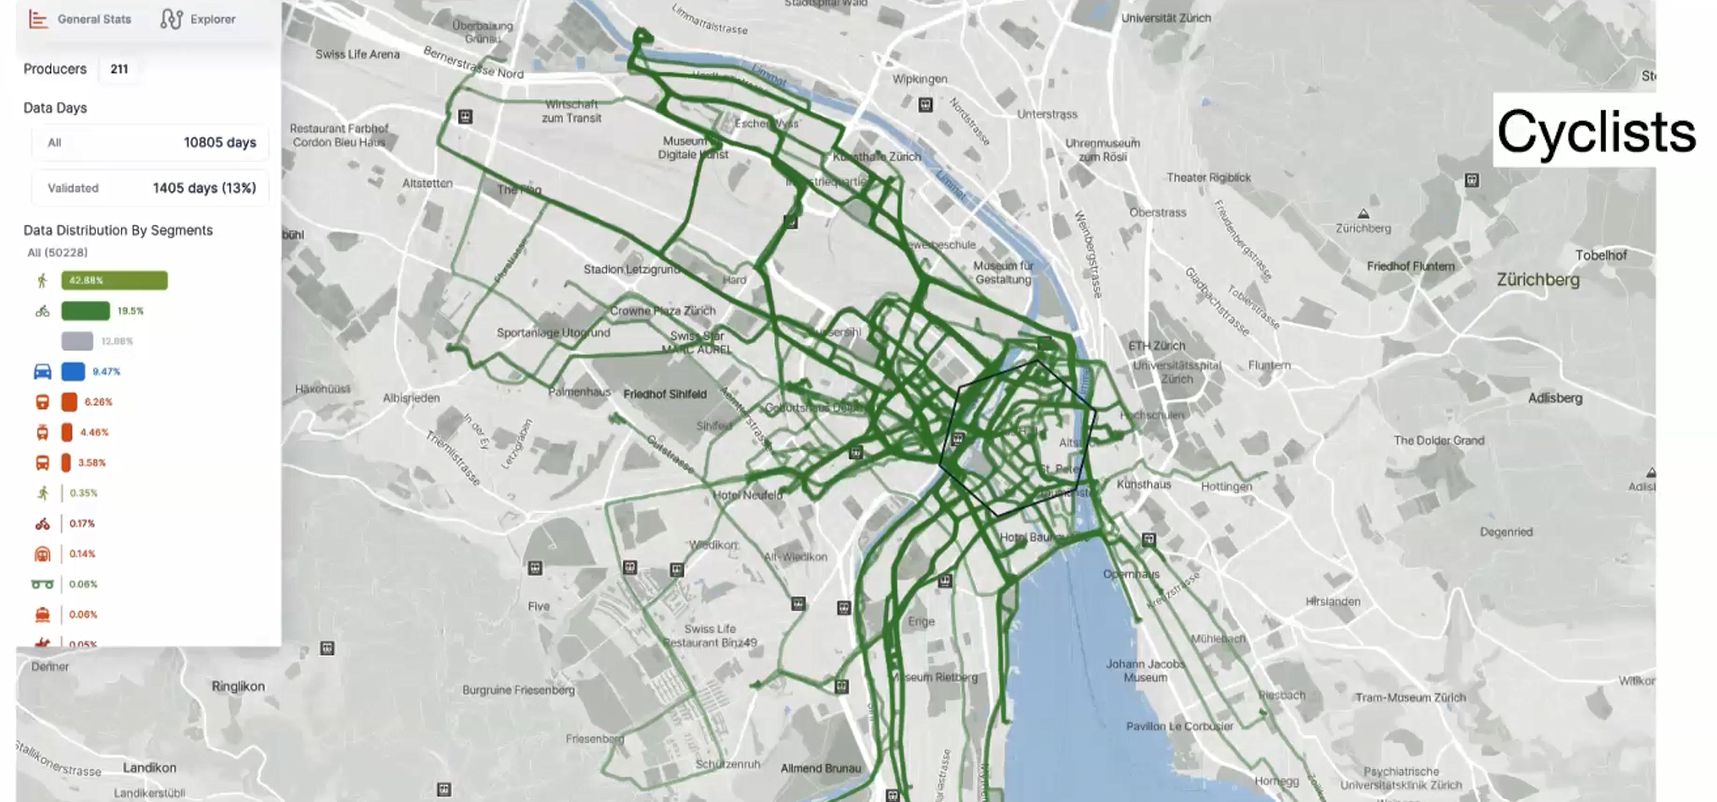 A map of Swiss city Zurich showing the mobility patterns of cyclists in the city